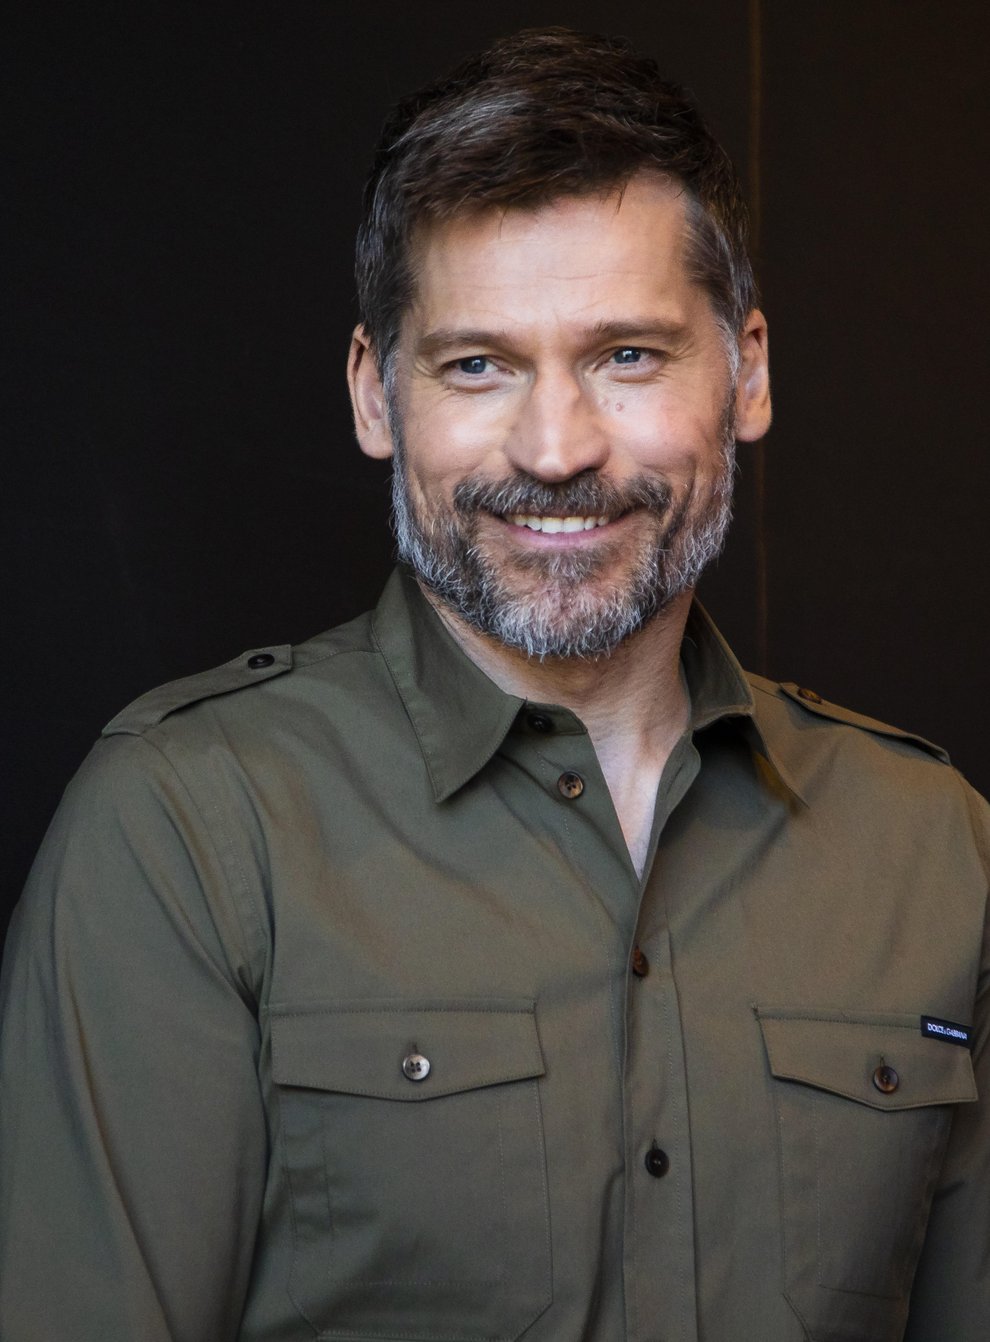 Coster-Waldau was one of the main characters throughout the show's eight season run